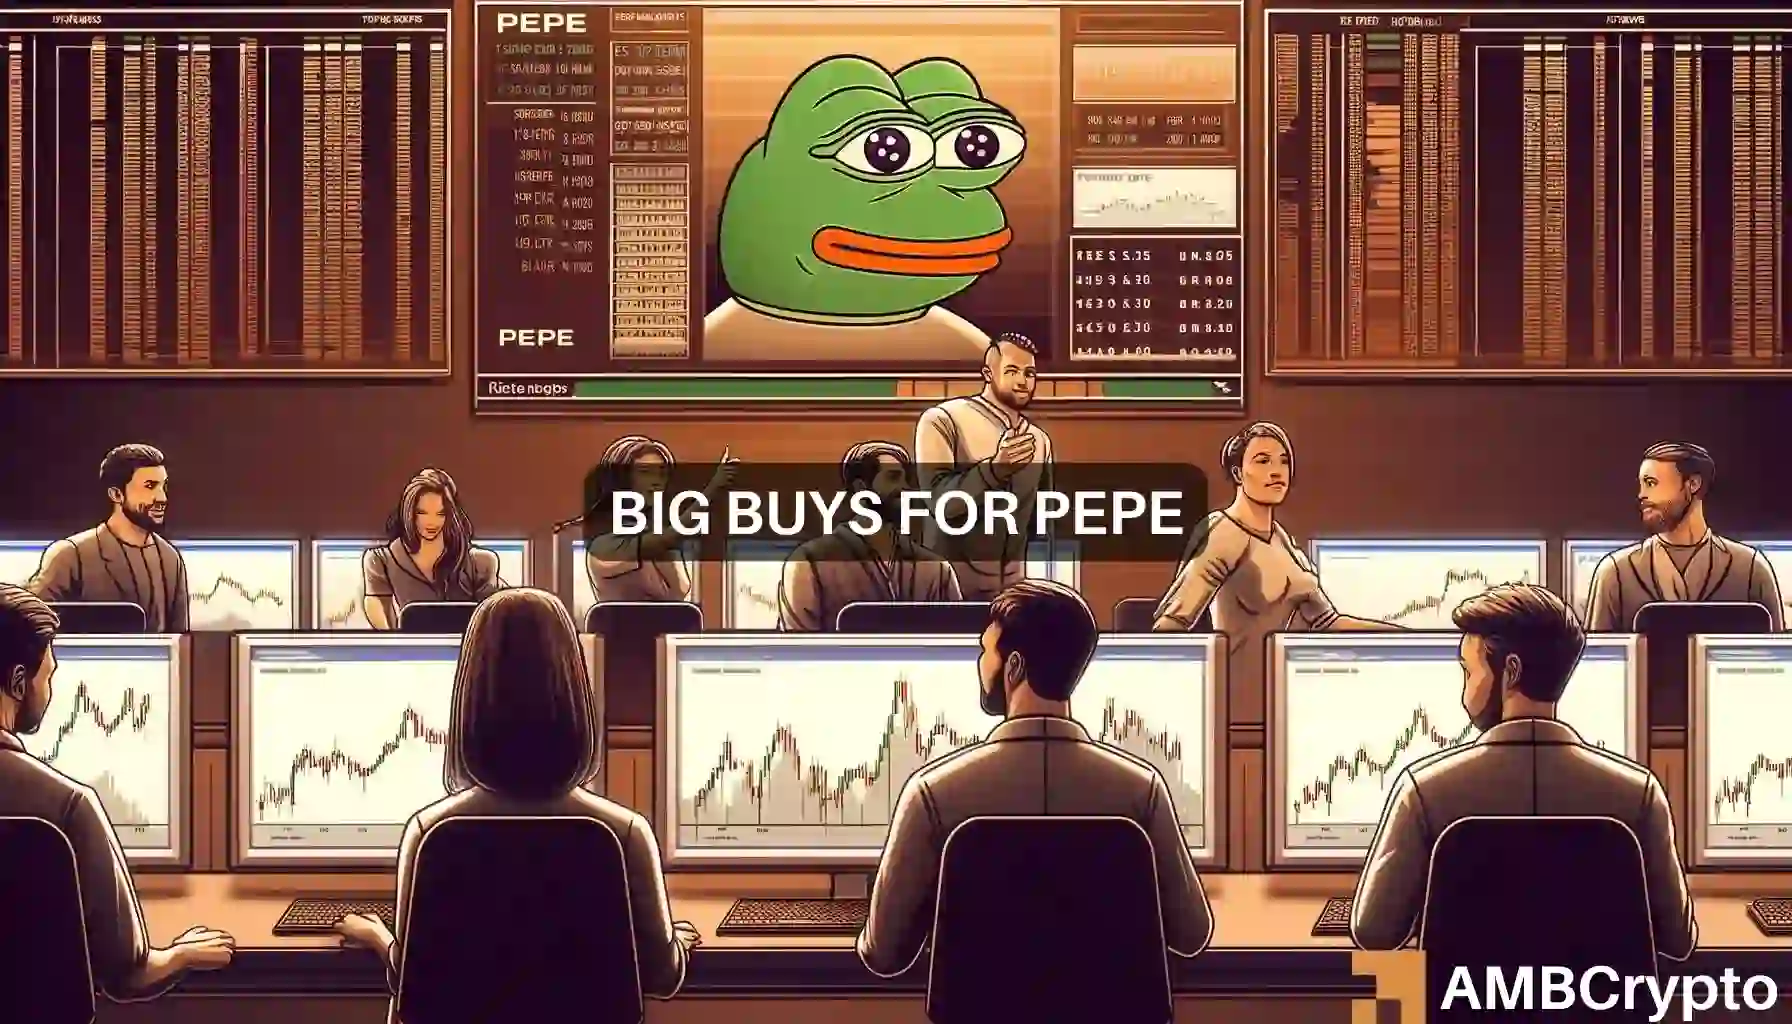 PEPE investors prefer to accumulate and HODL, not sell: Why?